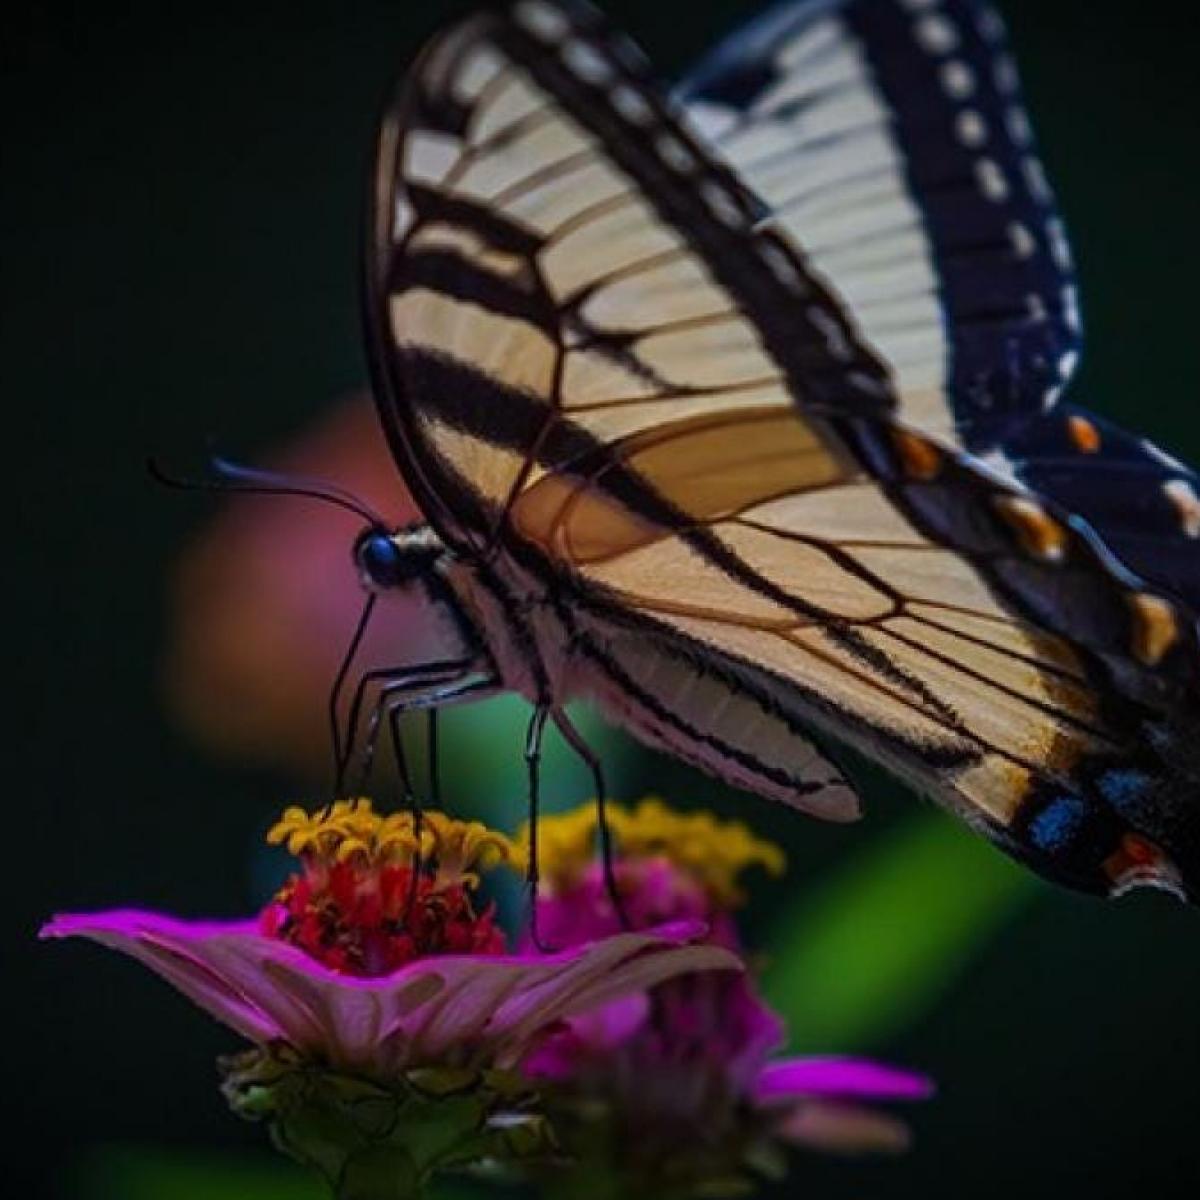 Eastern tiger swallowtail (Papilio glaucus) drinking nectar from zinnia flower. 